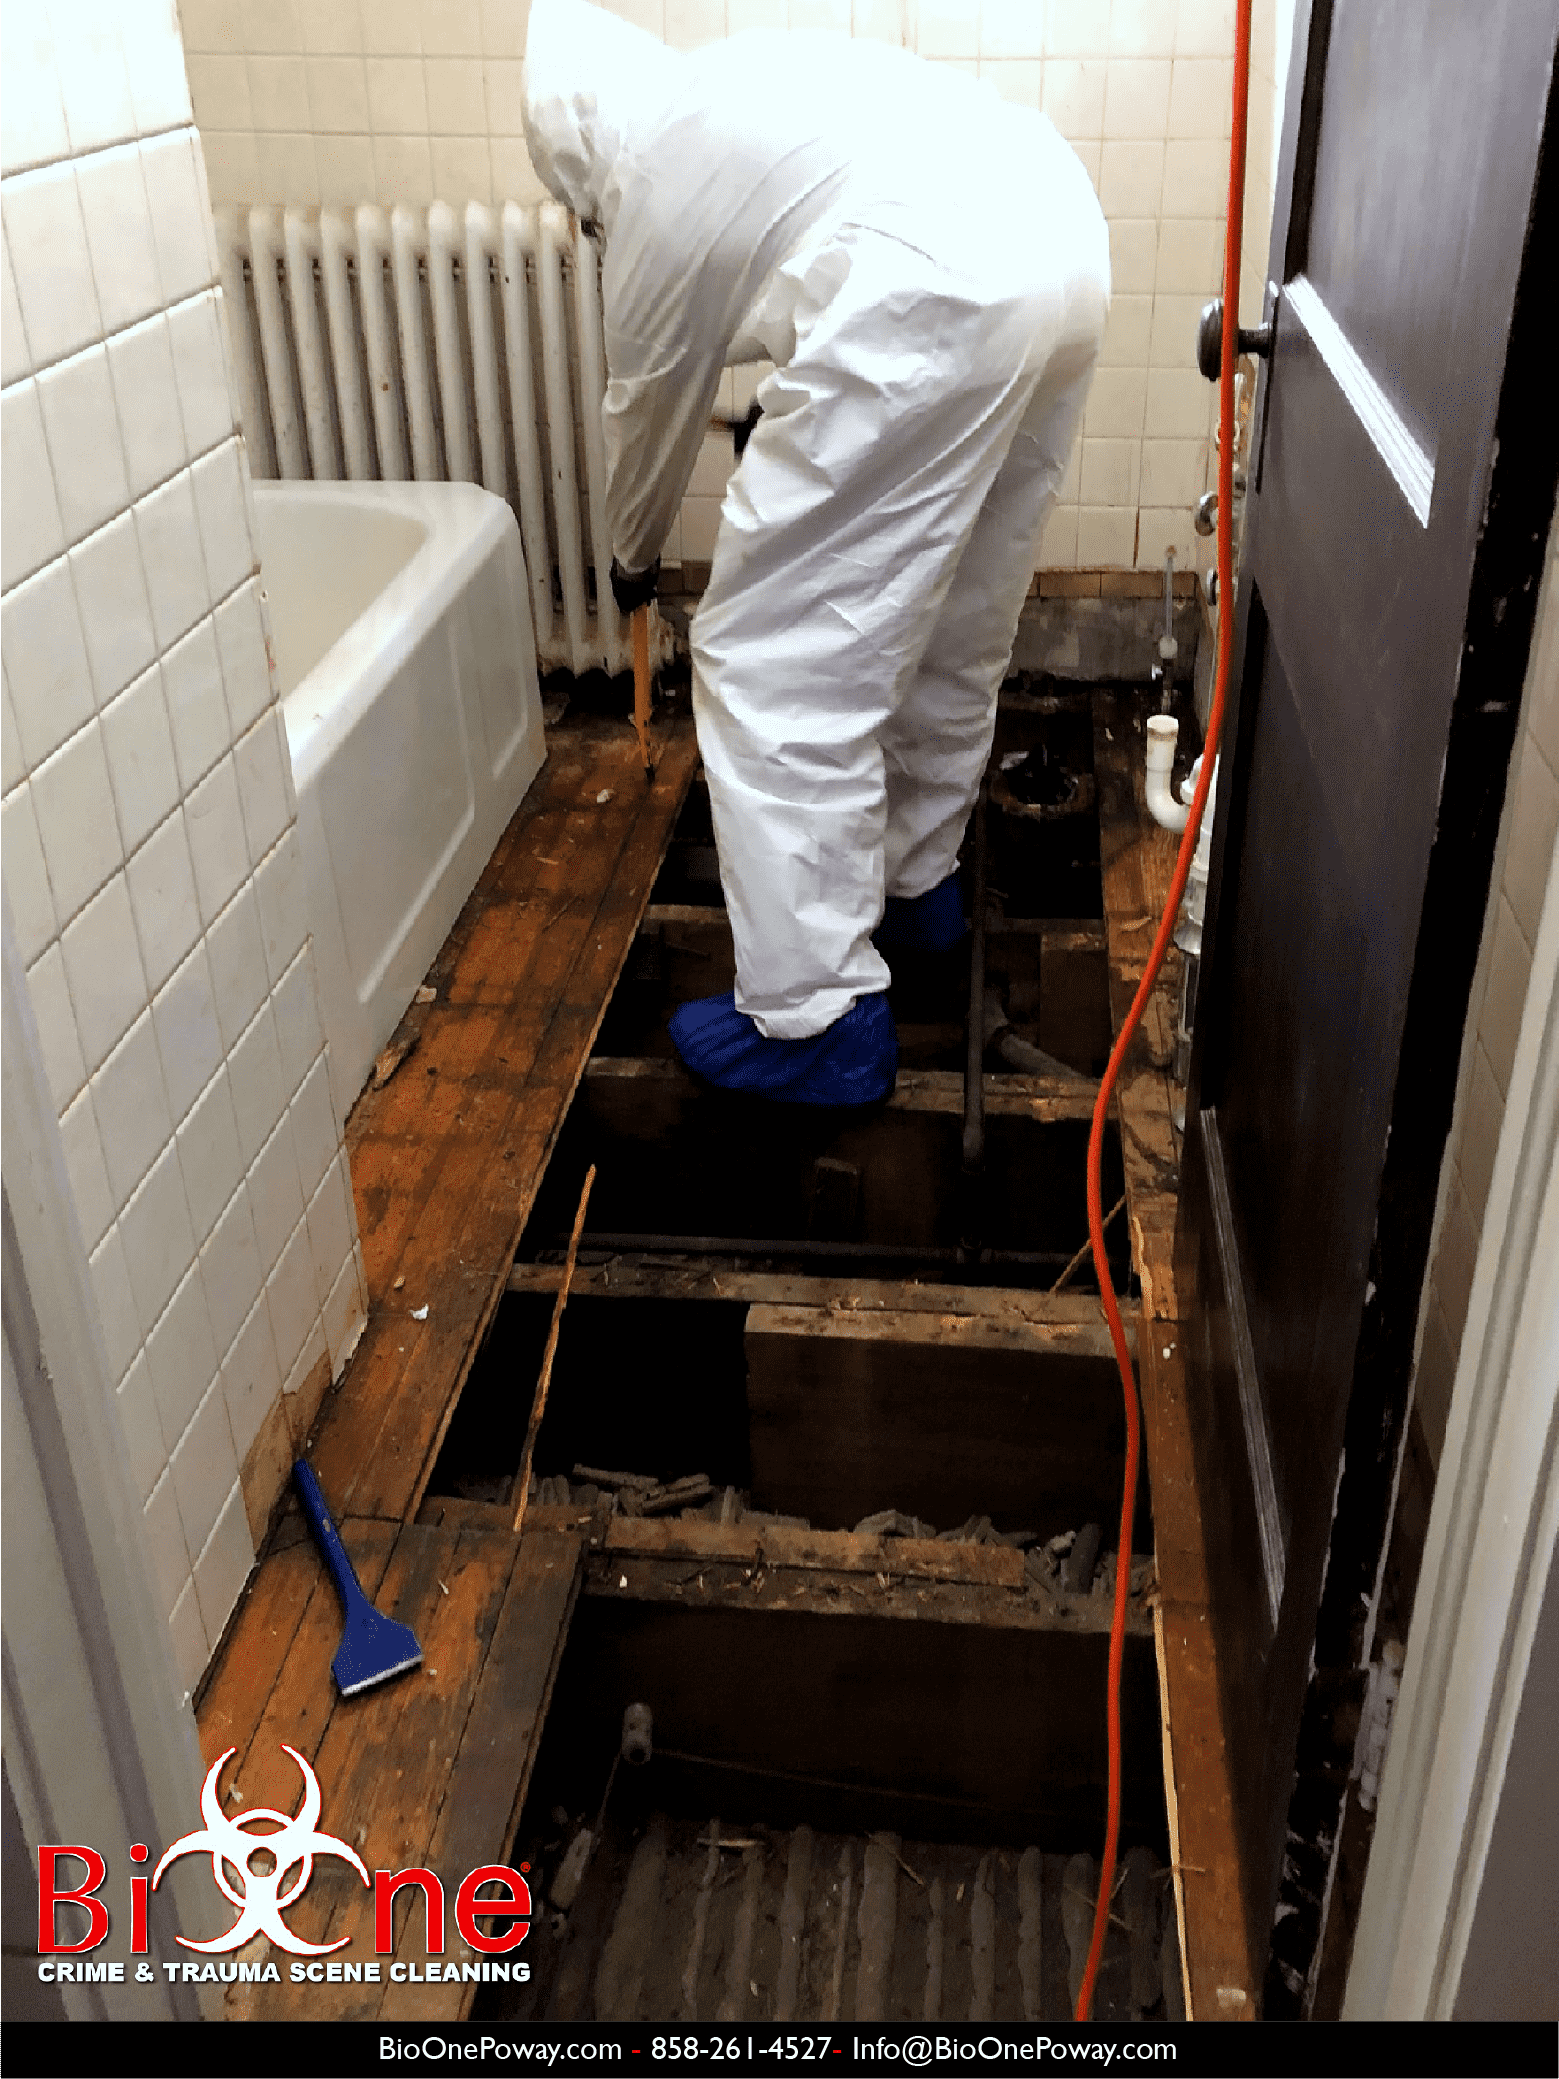 Image shows Bio-One technician removing  hardwood flooring damaged by mold in a bathroom.